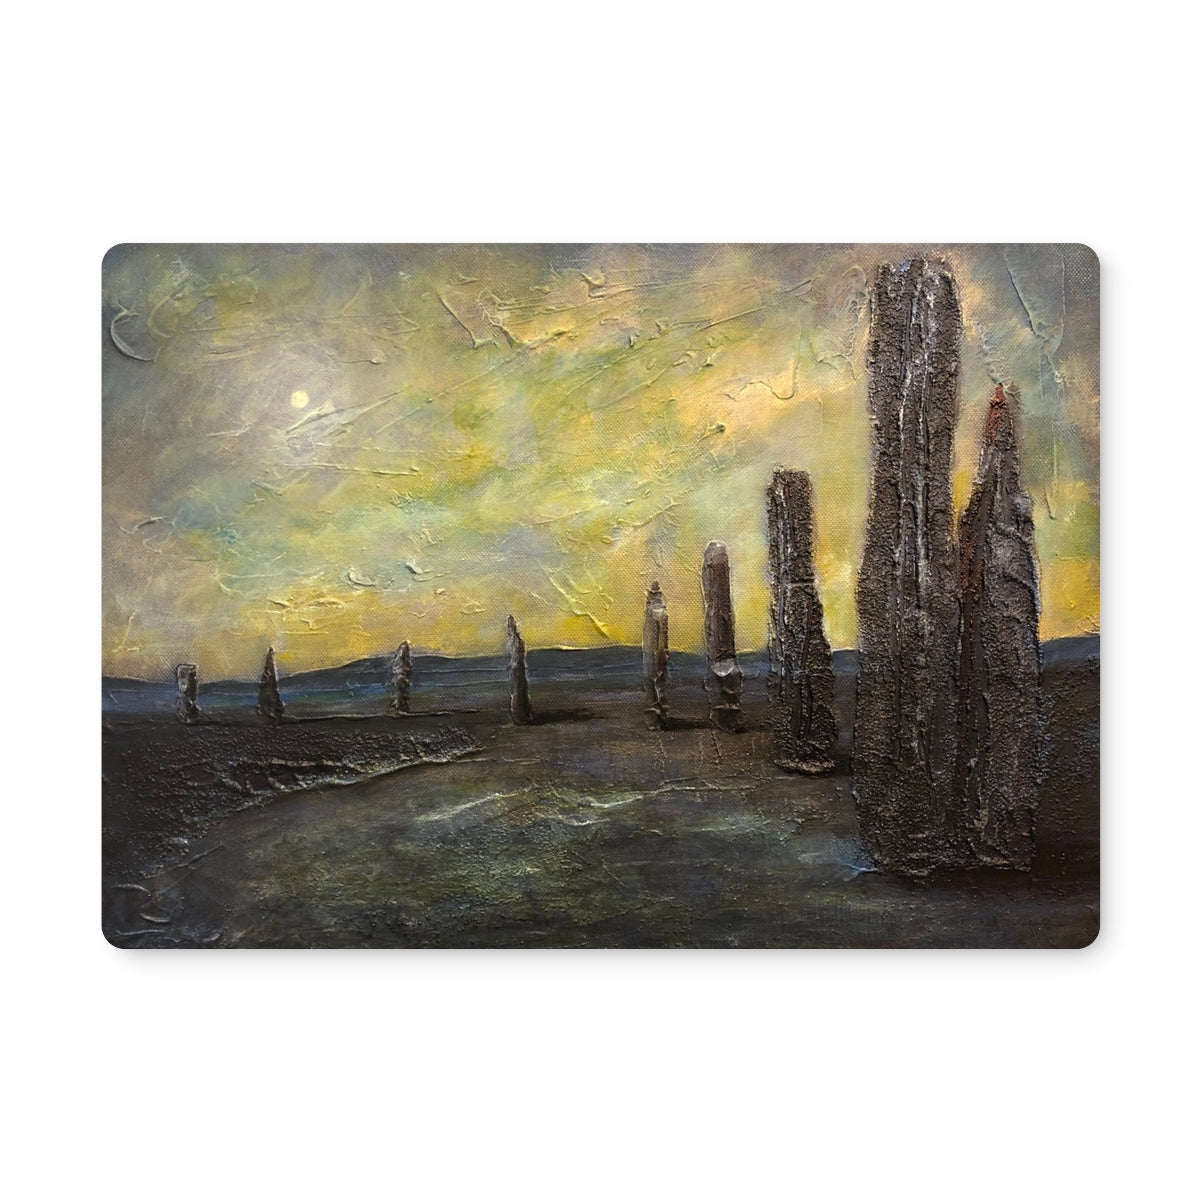 An Ethereal Ring Of Brodgar Art Gifts Placemat-Placemats-Orkney Art Gallery-6 Placemats-Paintings, Prints, Homeware, Art Gifts From Scotland By Scottish Artist Kevin Hunter